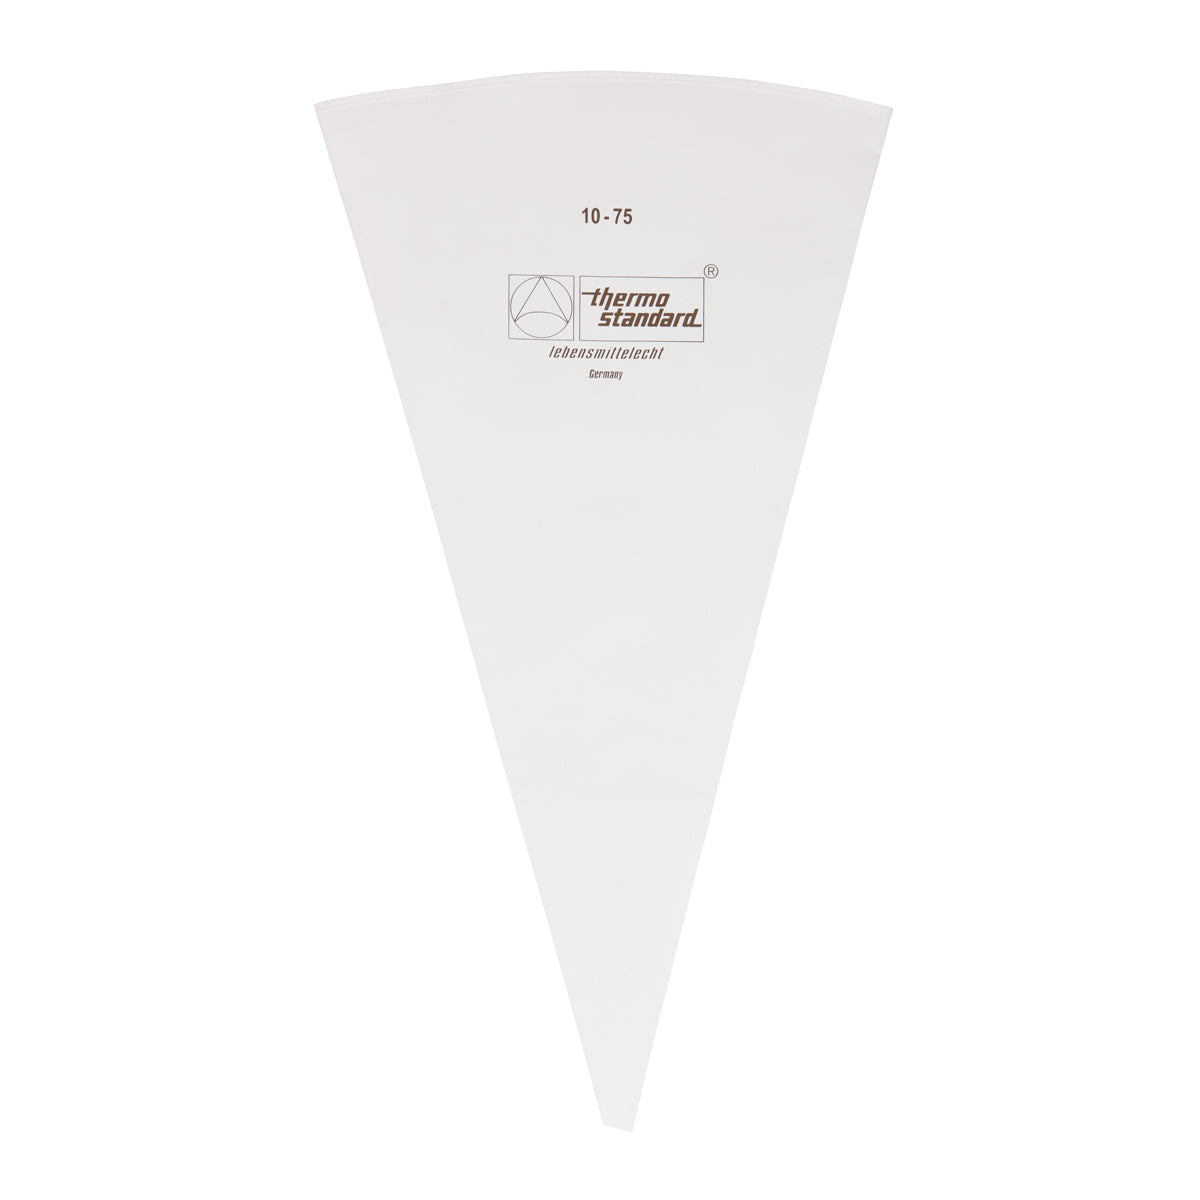 01780 Thermohauser Standard Pastry Bag 750mm Tomkin Australia Hospitality Supplies